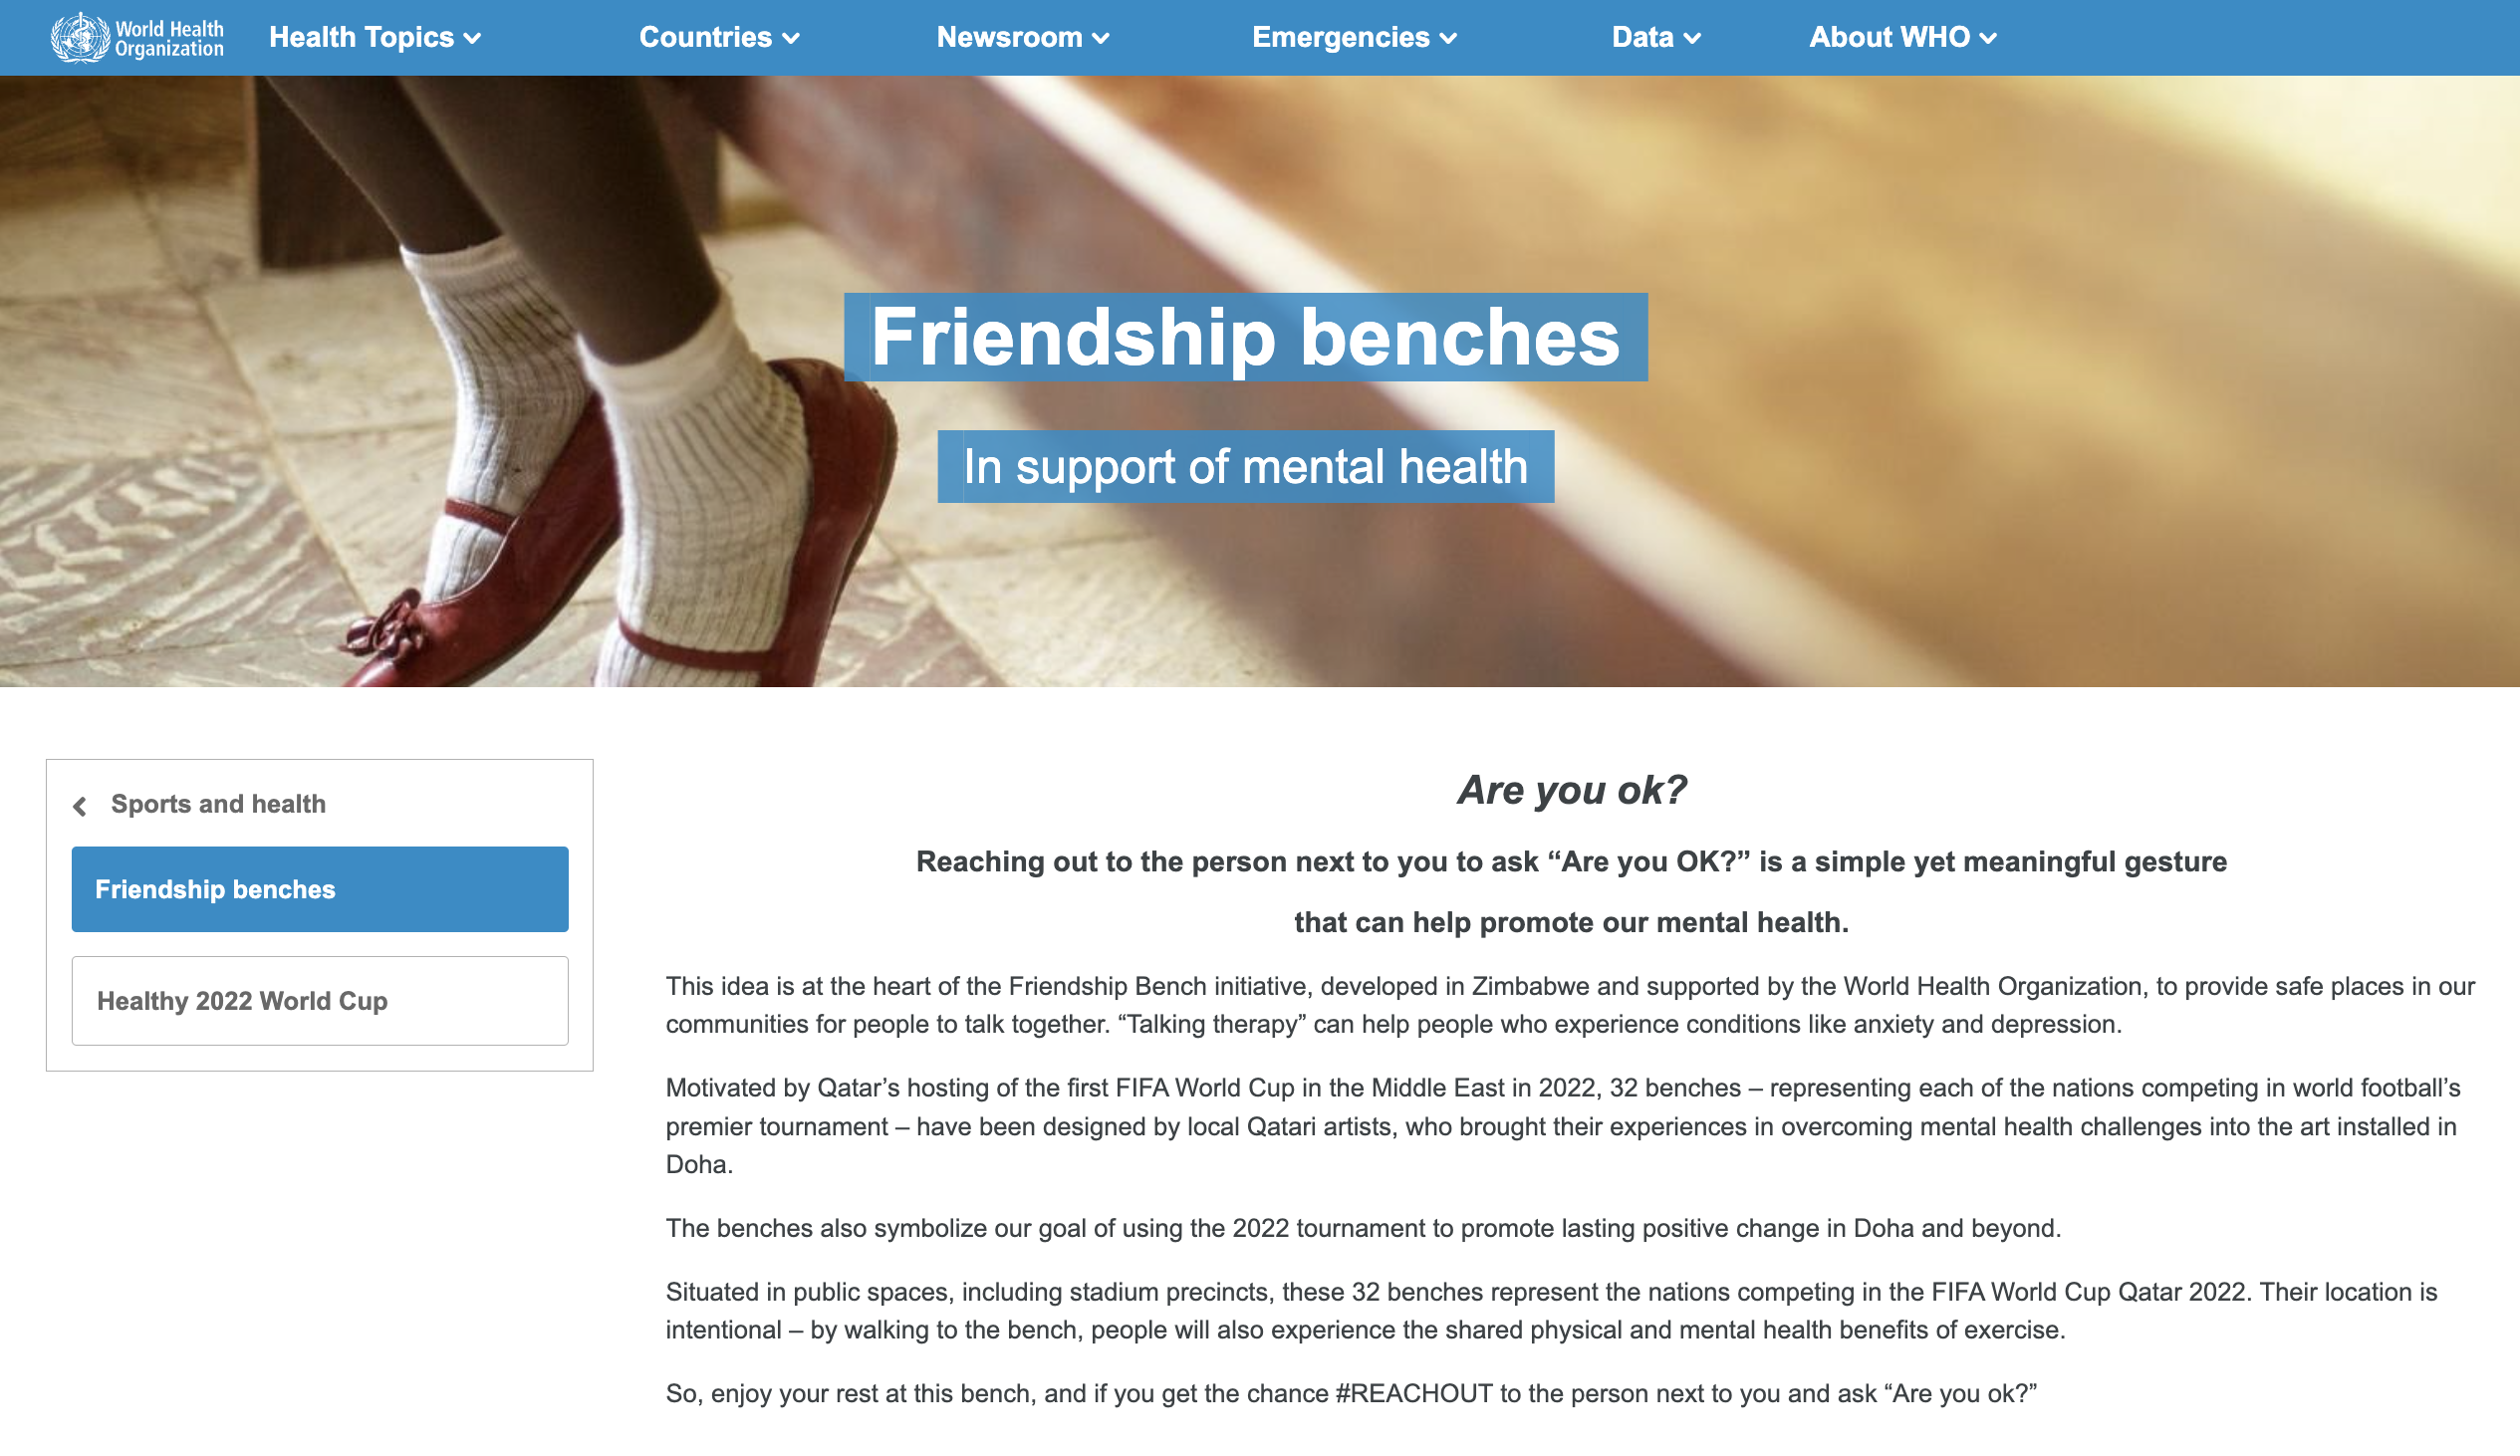 article from the WHO on the friendship bench